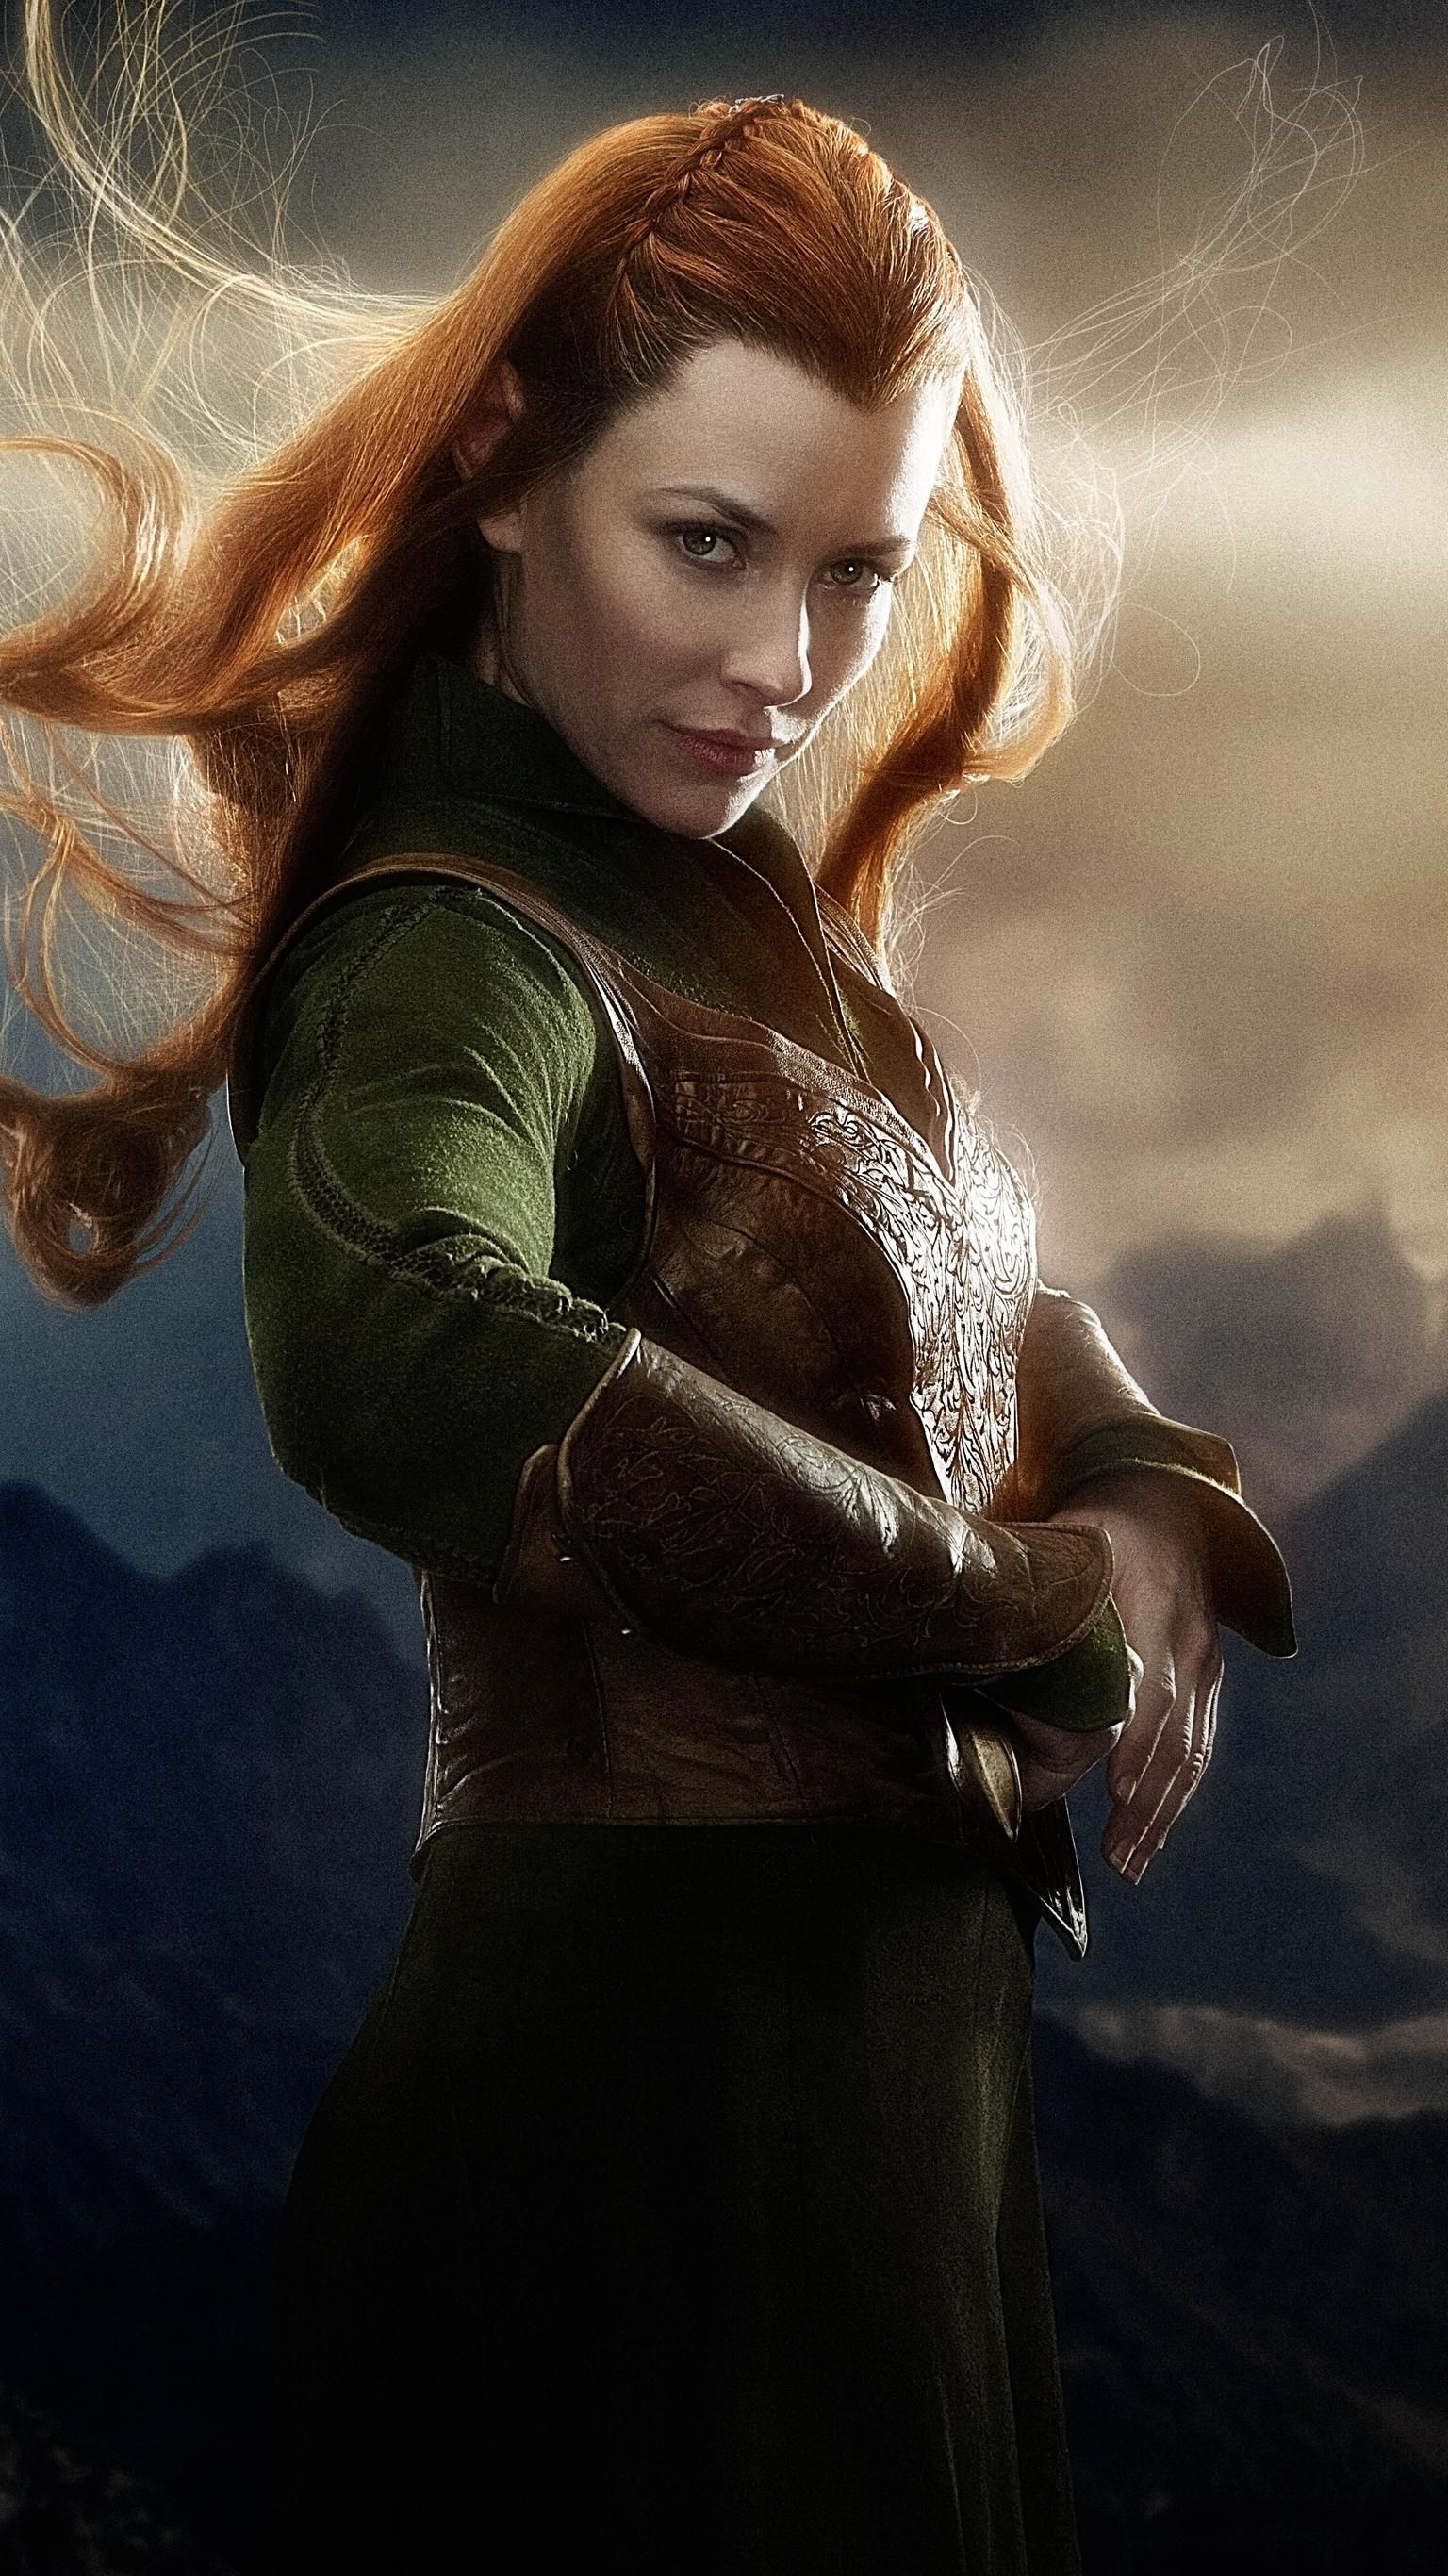 Tauriel in The Hobbit, Desolation of Smaug wallpaper, Elven warrior, Heroic and fierce, 1540x2740 HD Phone